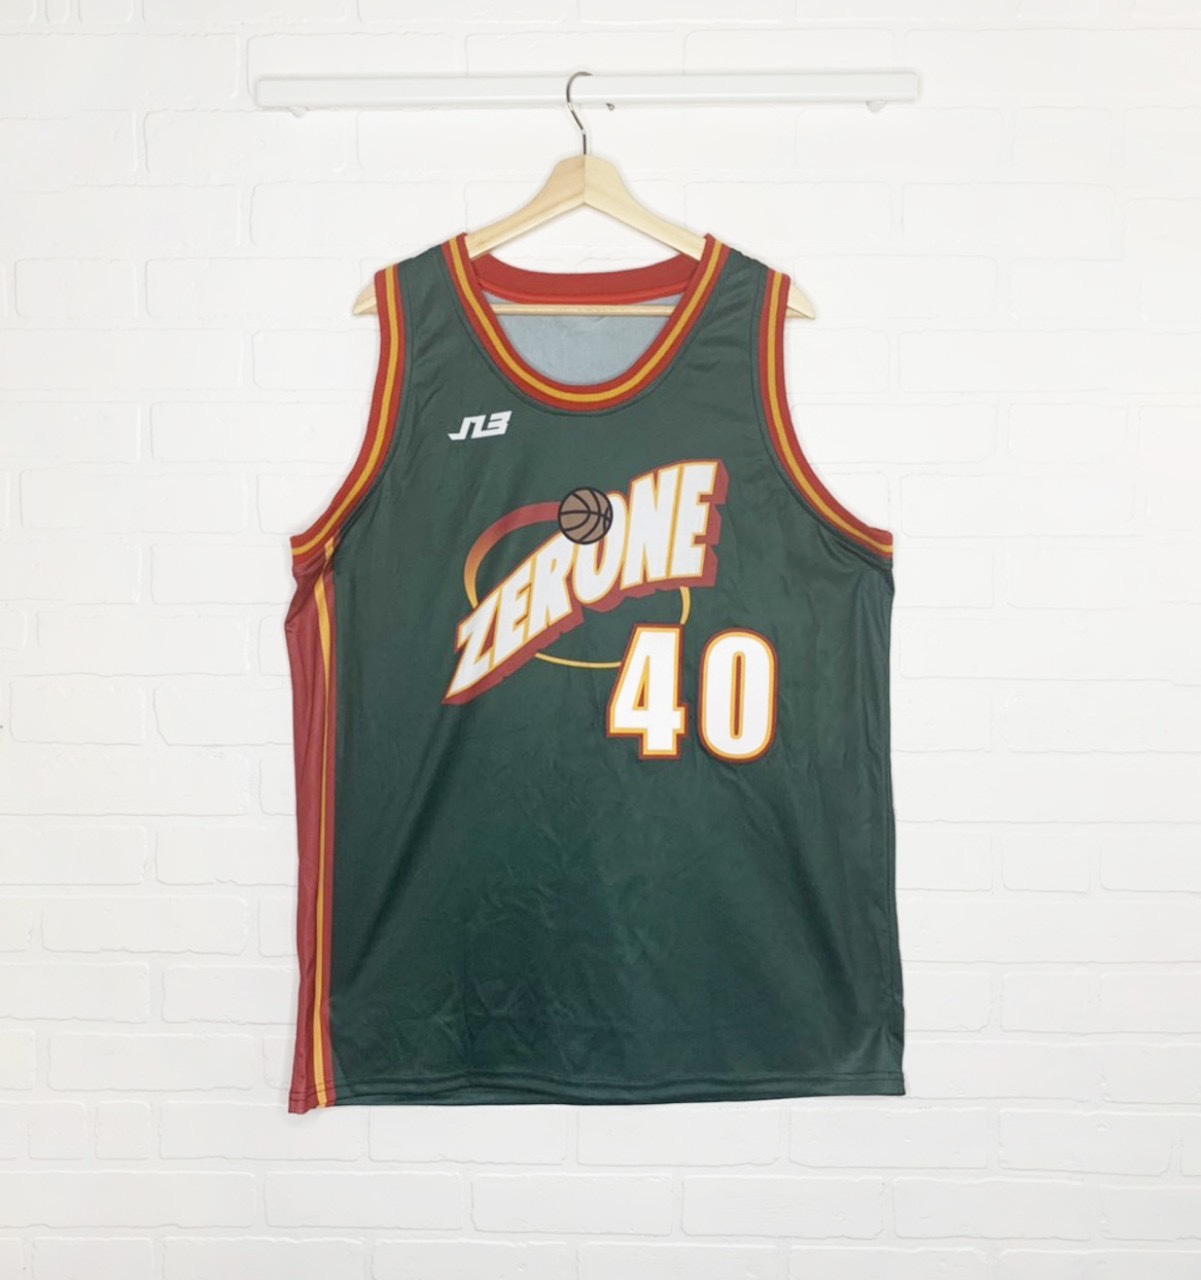 Vintage Rawling's Brand “42” Basketball Jersey – Wooden Sleepers